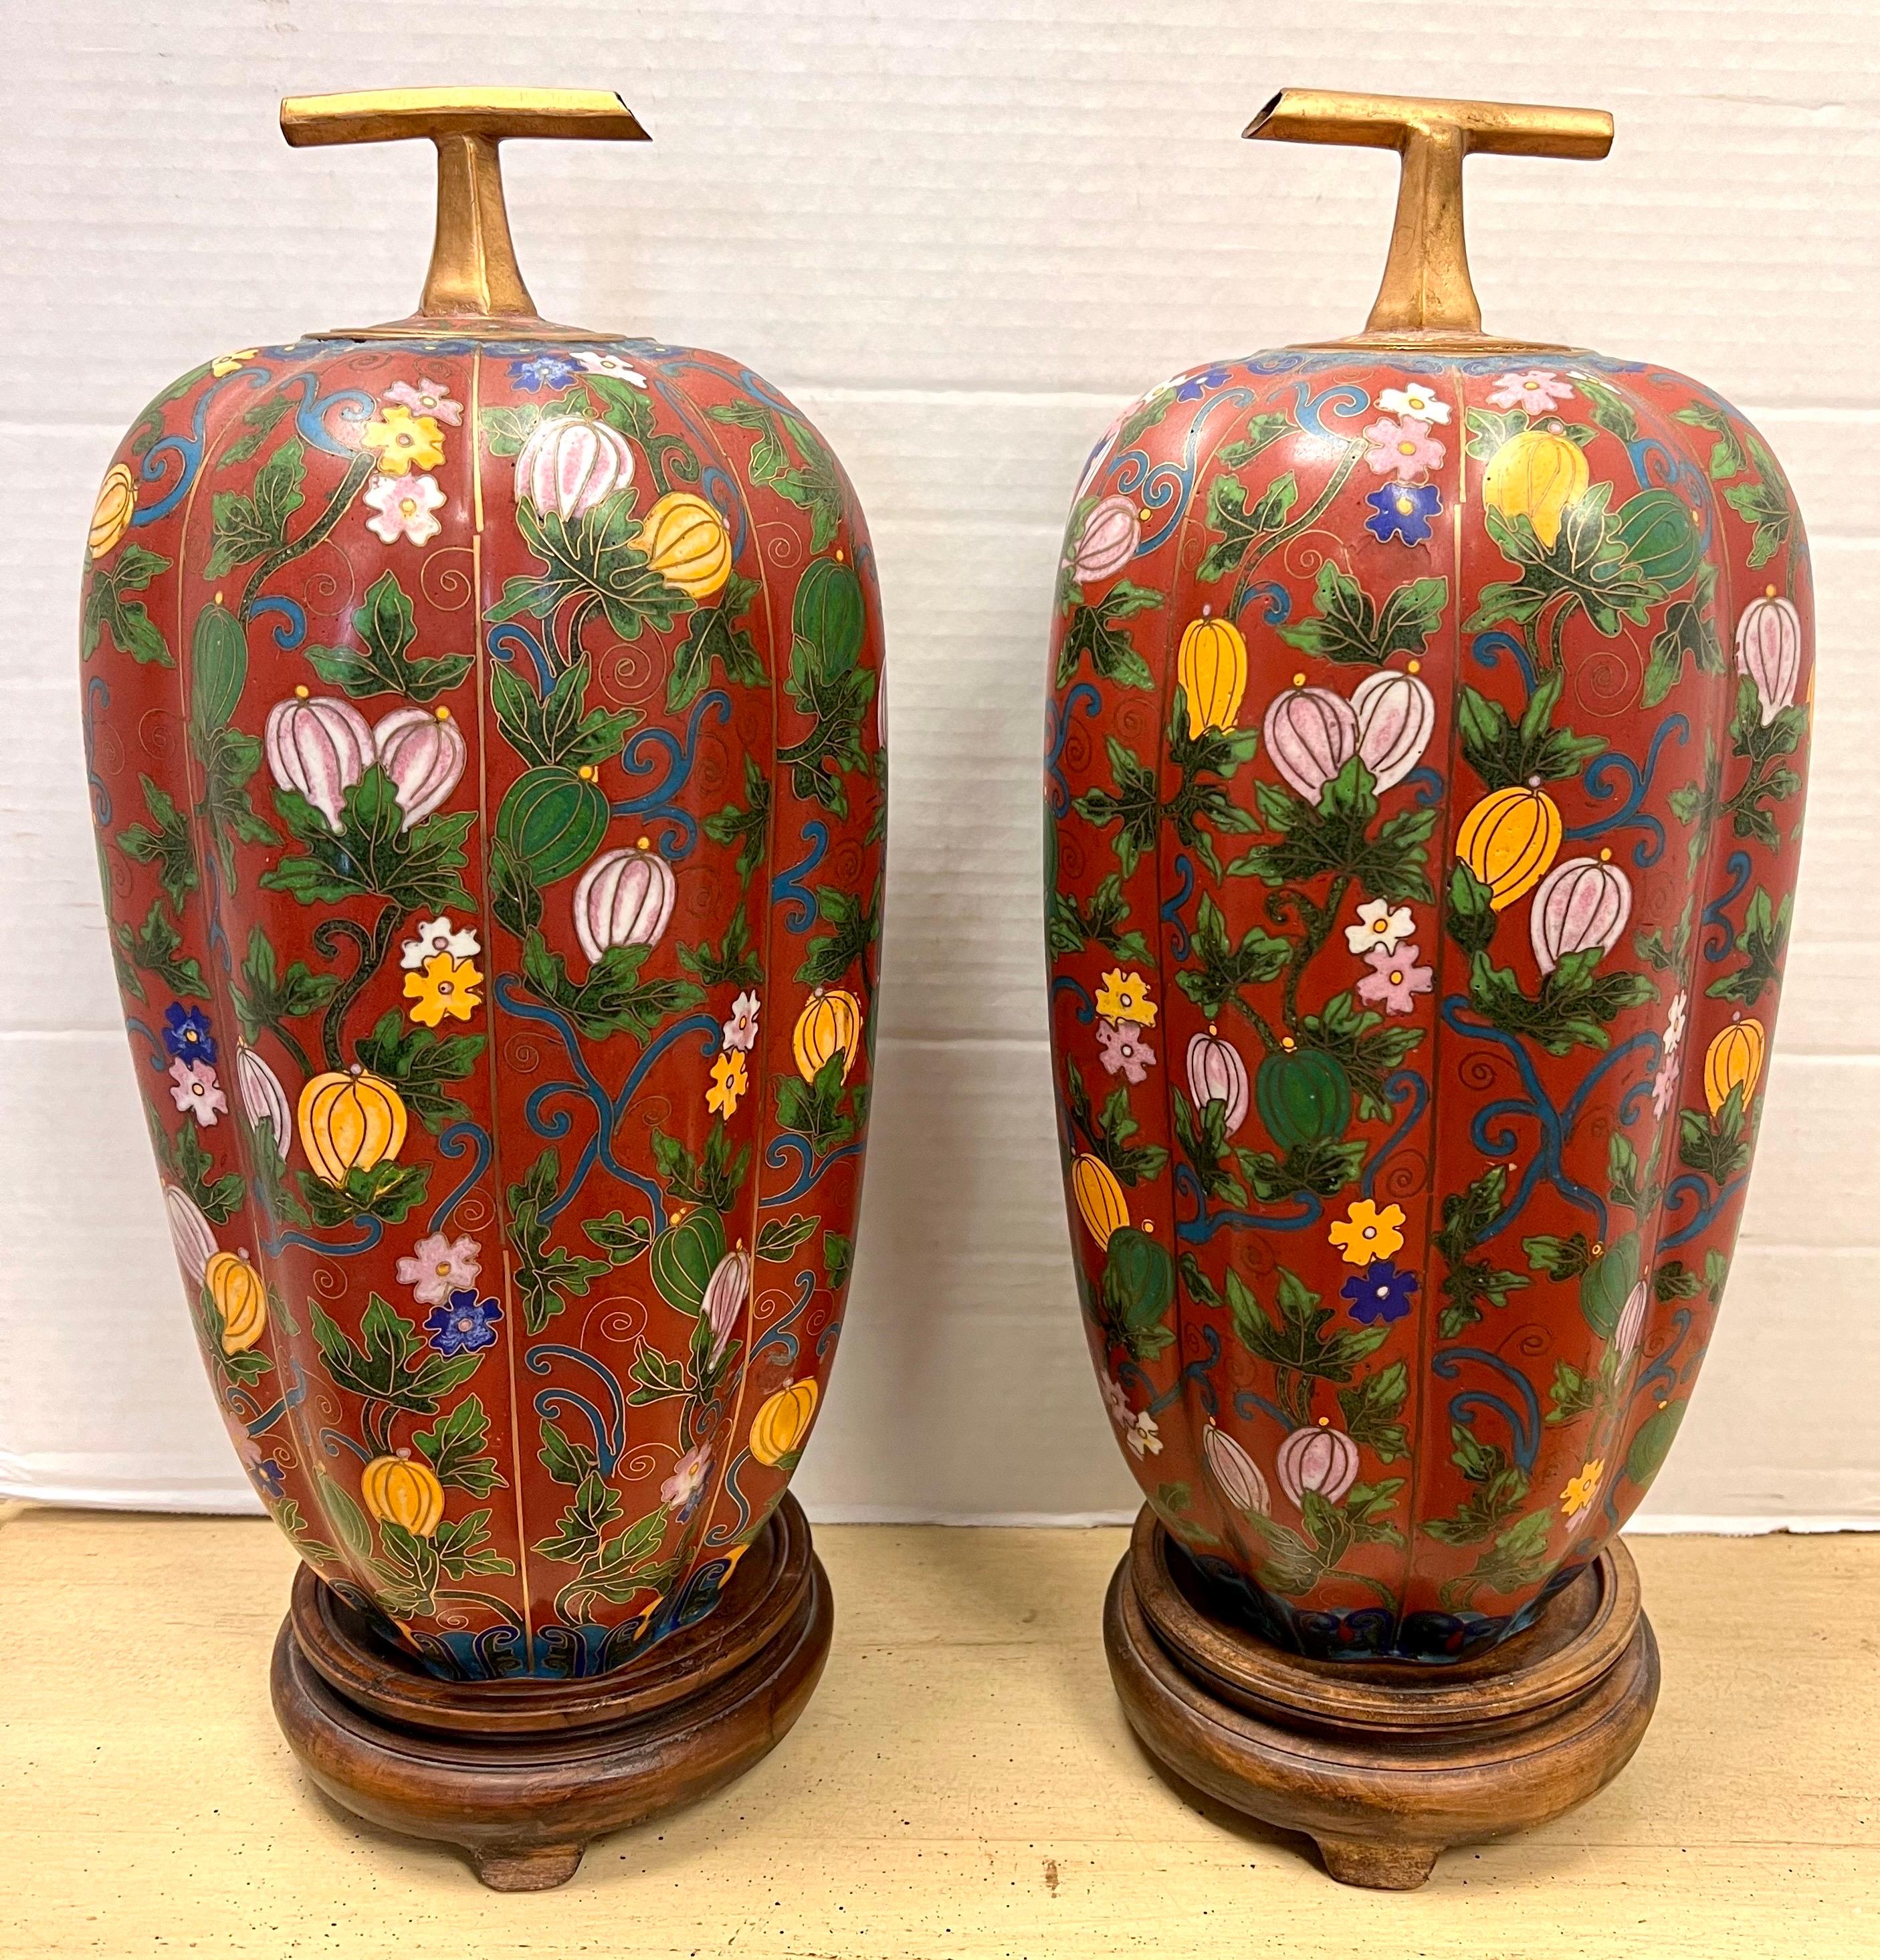 Rare pair of Chinese gilded covered vases with cloisonne enamel, decor of hand painted climbing ghords and flowers on a dark red background enhanced with gold tracery. Features bronze handles as stems. circa early 20th century. Note the wood bases